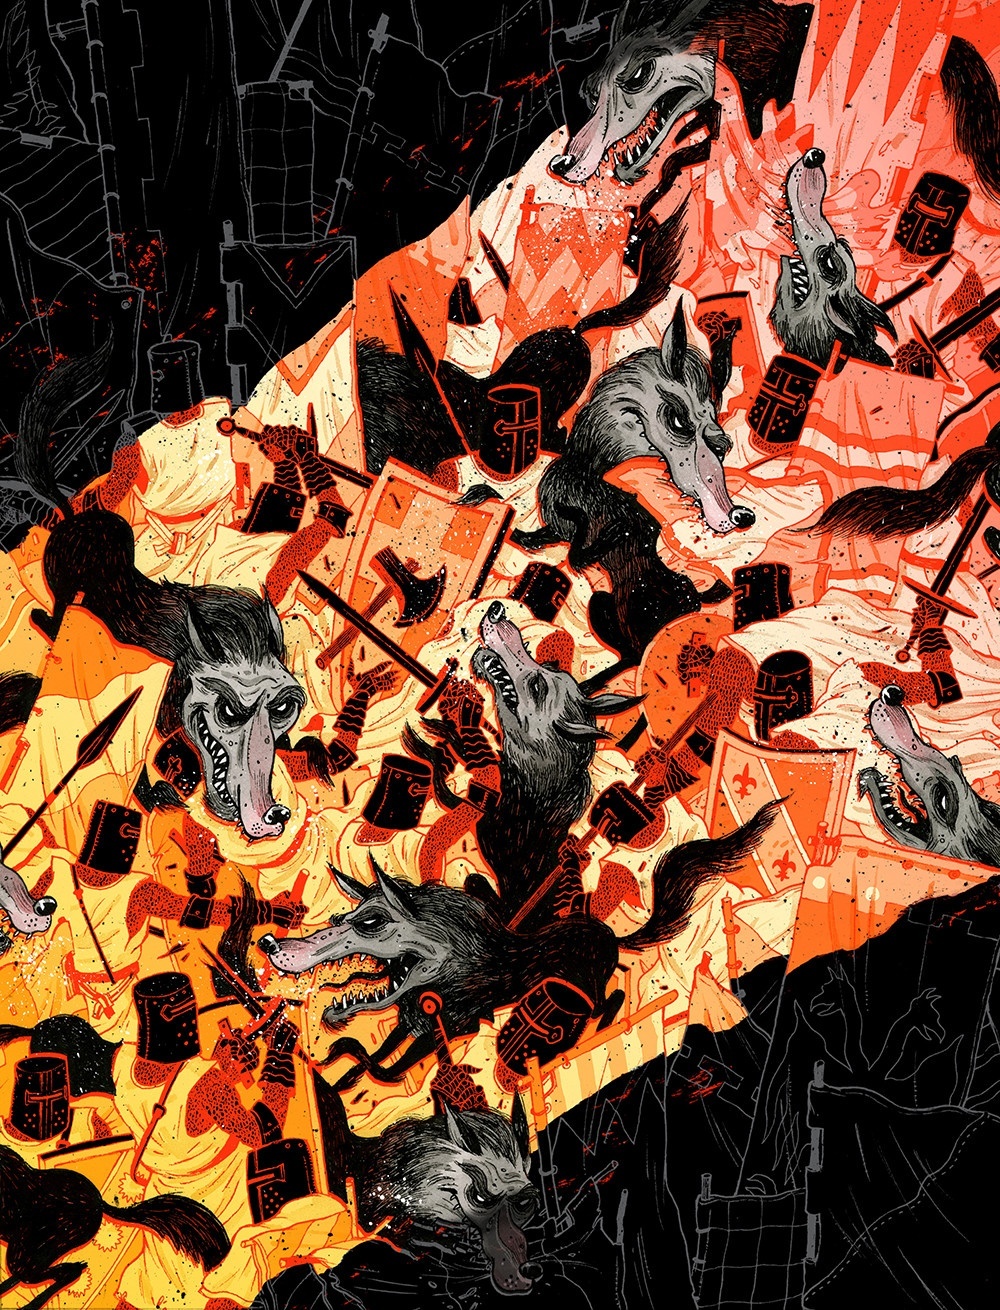 An illustration on a black background: in a band/strip of full color across a diagonal (from top right to bottom left), wolves jostle against knights, whose spears and axes are lost amongst a tide of flames — blood is splattered on the background.